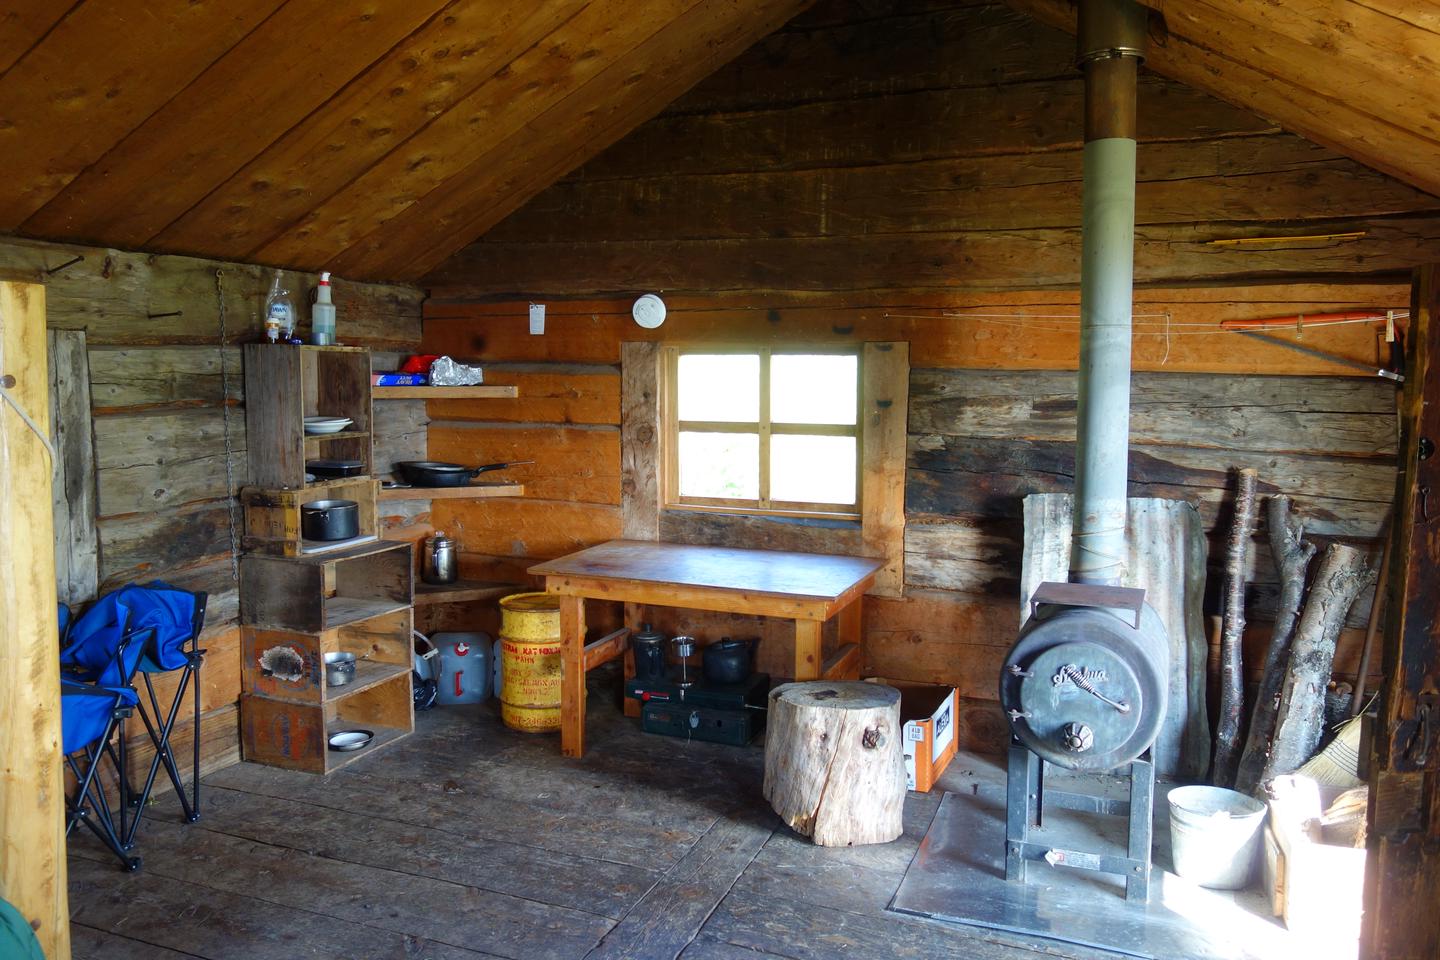 Inside a rustic wooden cabin with a small table, wood burning stove, and small shelves with cooking items.Fure's Cabin has a wood burning stove and space for cooking.